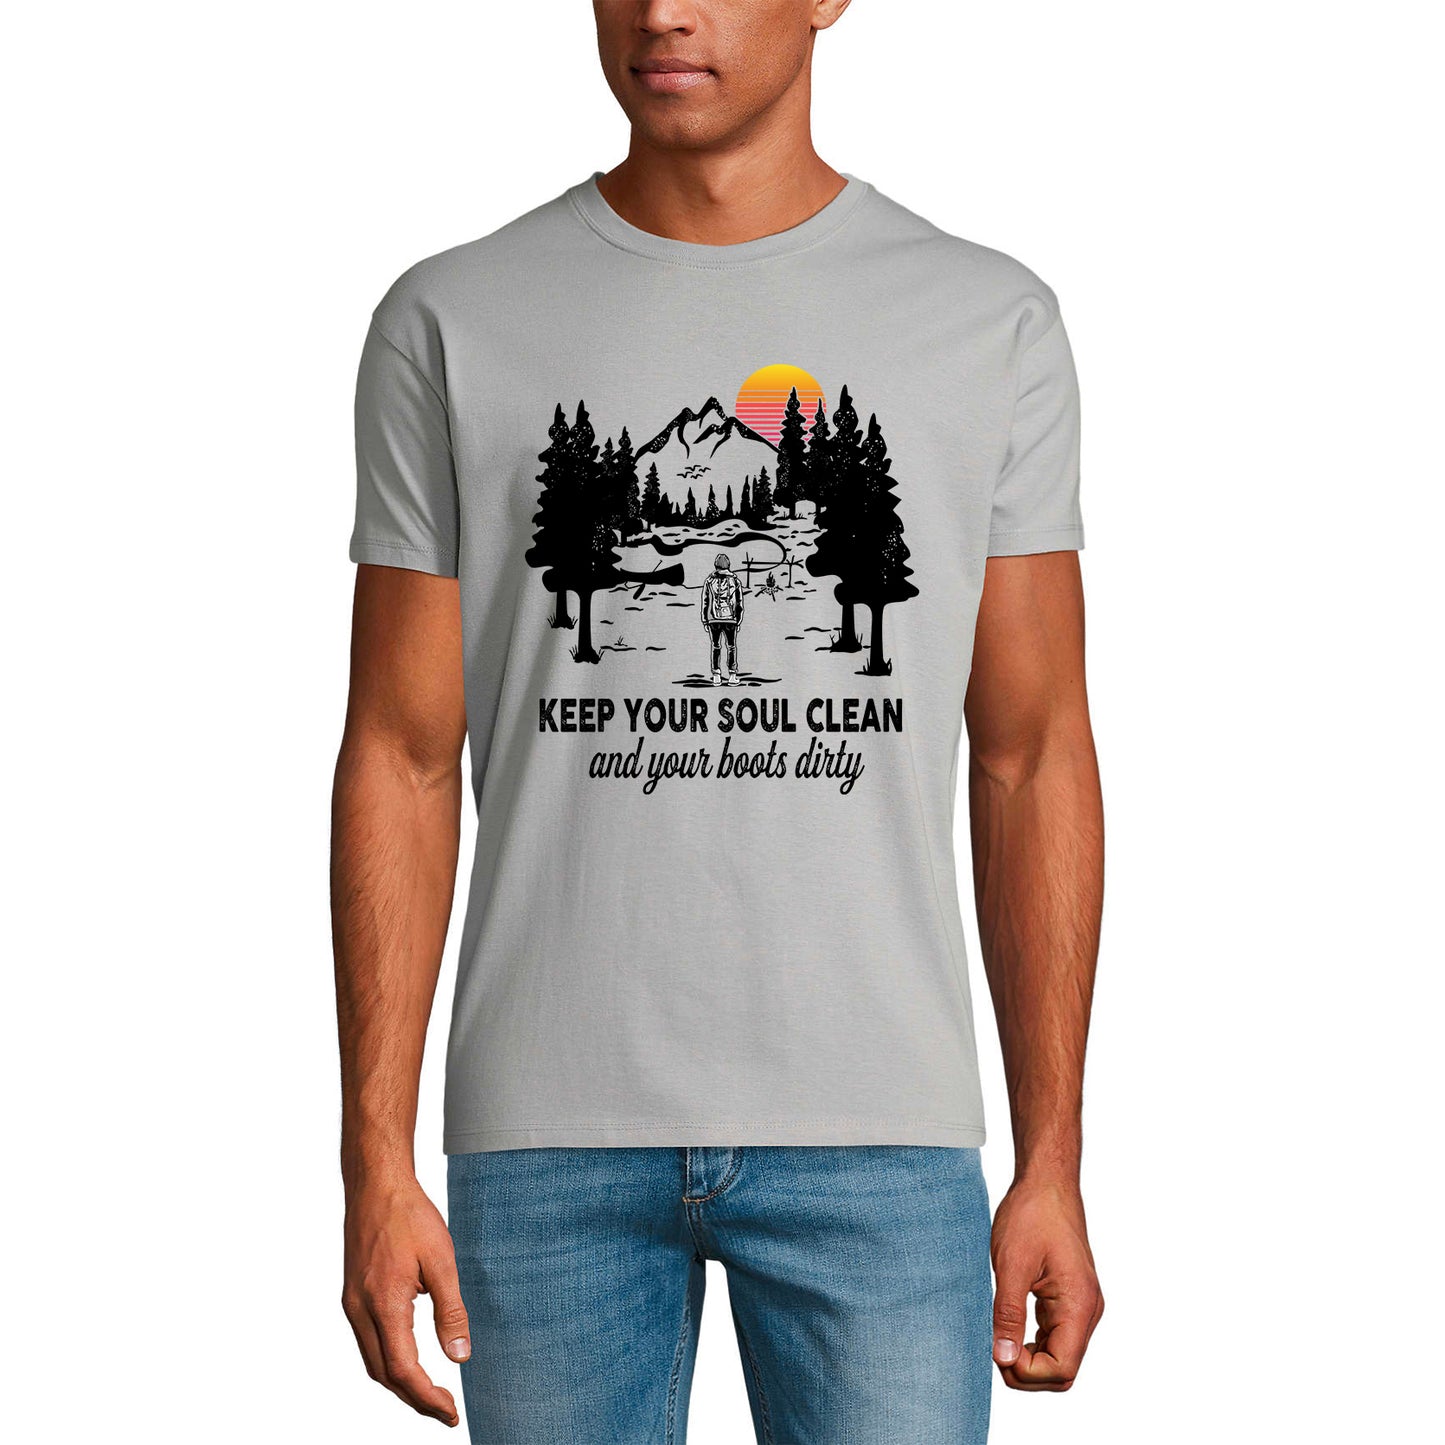 ULTRABASIC Men's T-Shirt Keep Your Soul Clean and Your Boots Dirty - Mountain Hiker Tee Shirt